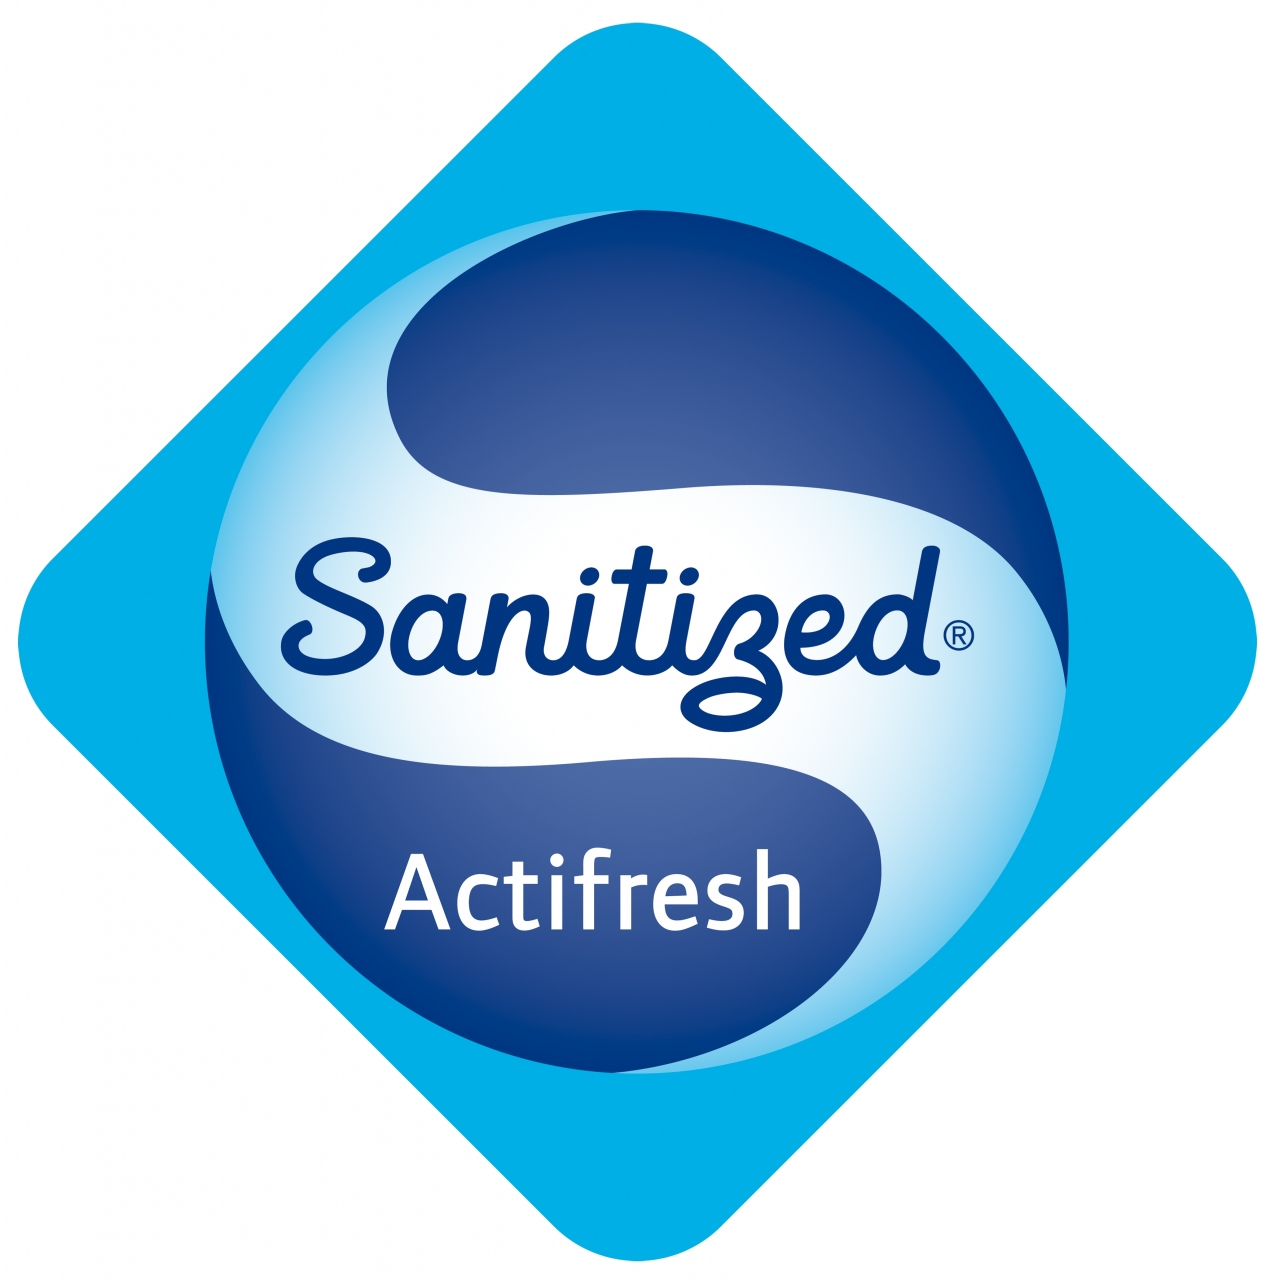 08.06.20_Healthcare_Sanitized